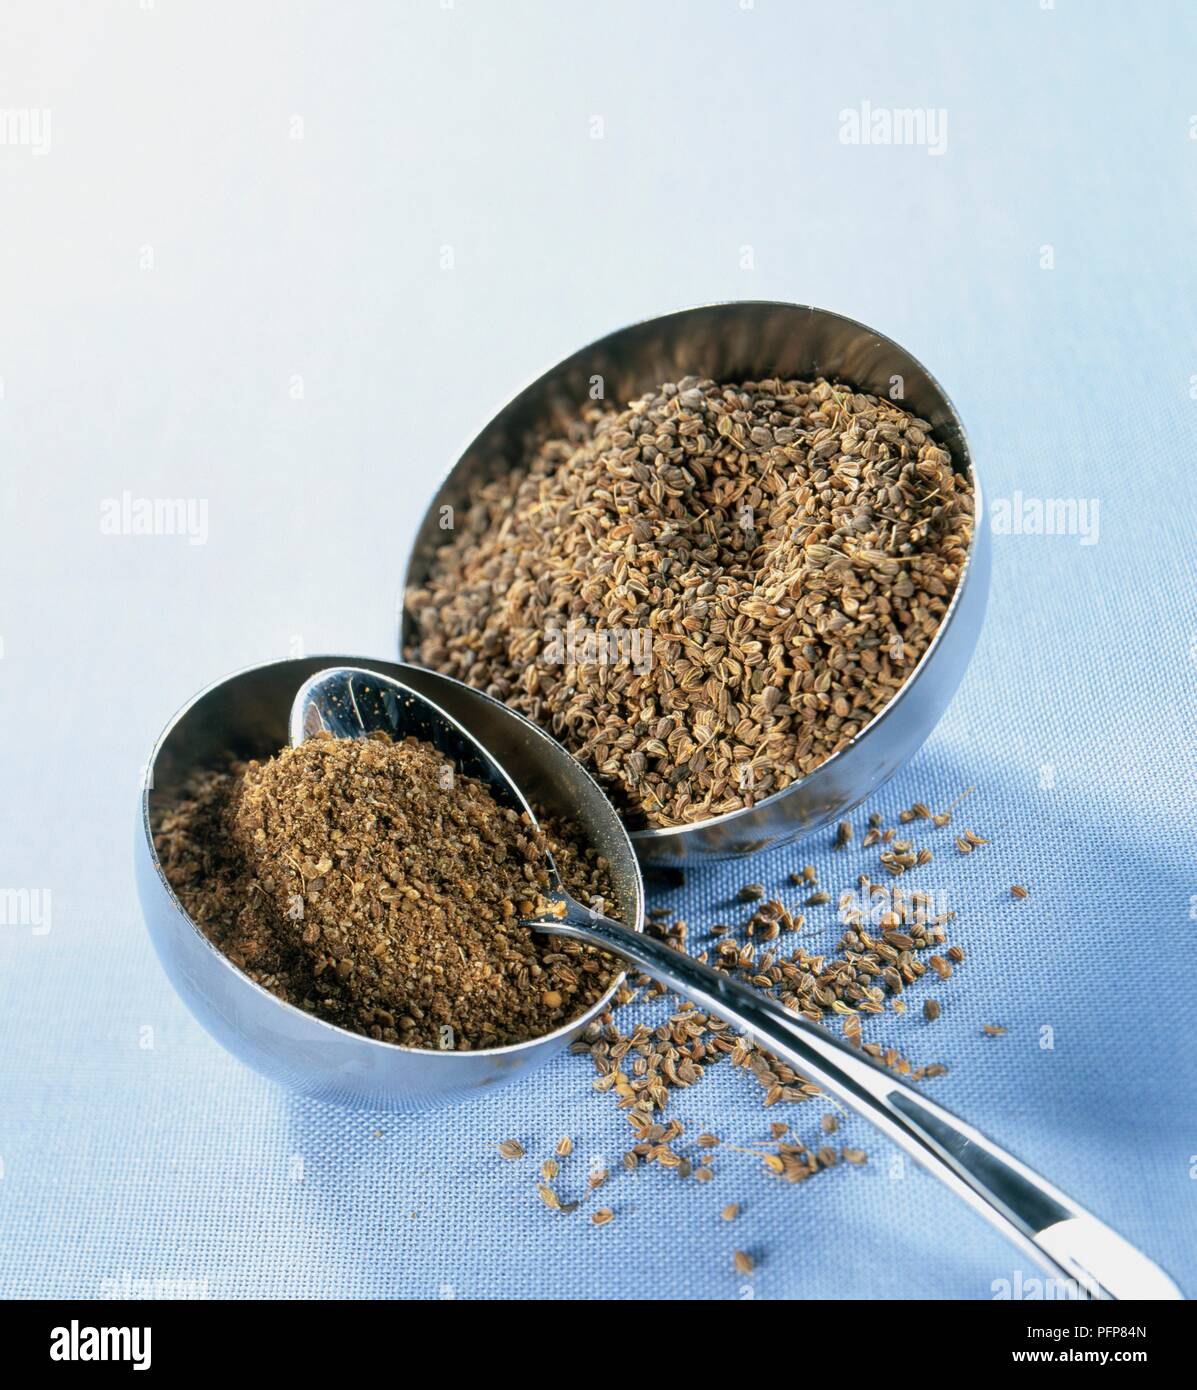 Pimpinella anisum (Aniseed), whole and ground seeds in metal bowls, with spoon Stock Photo